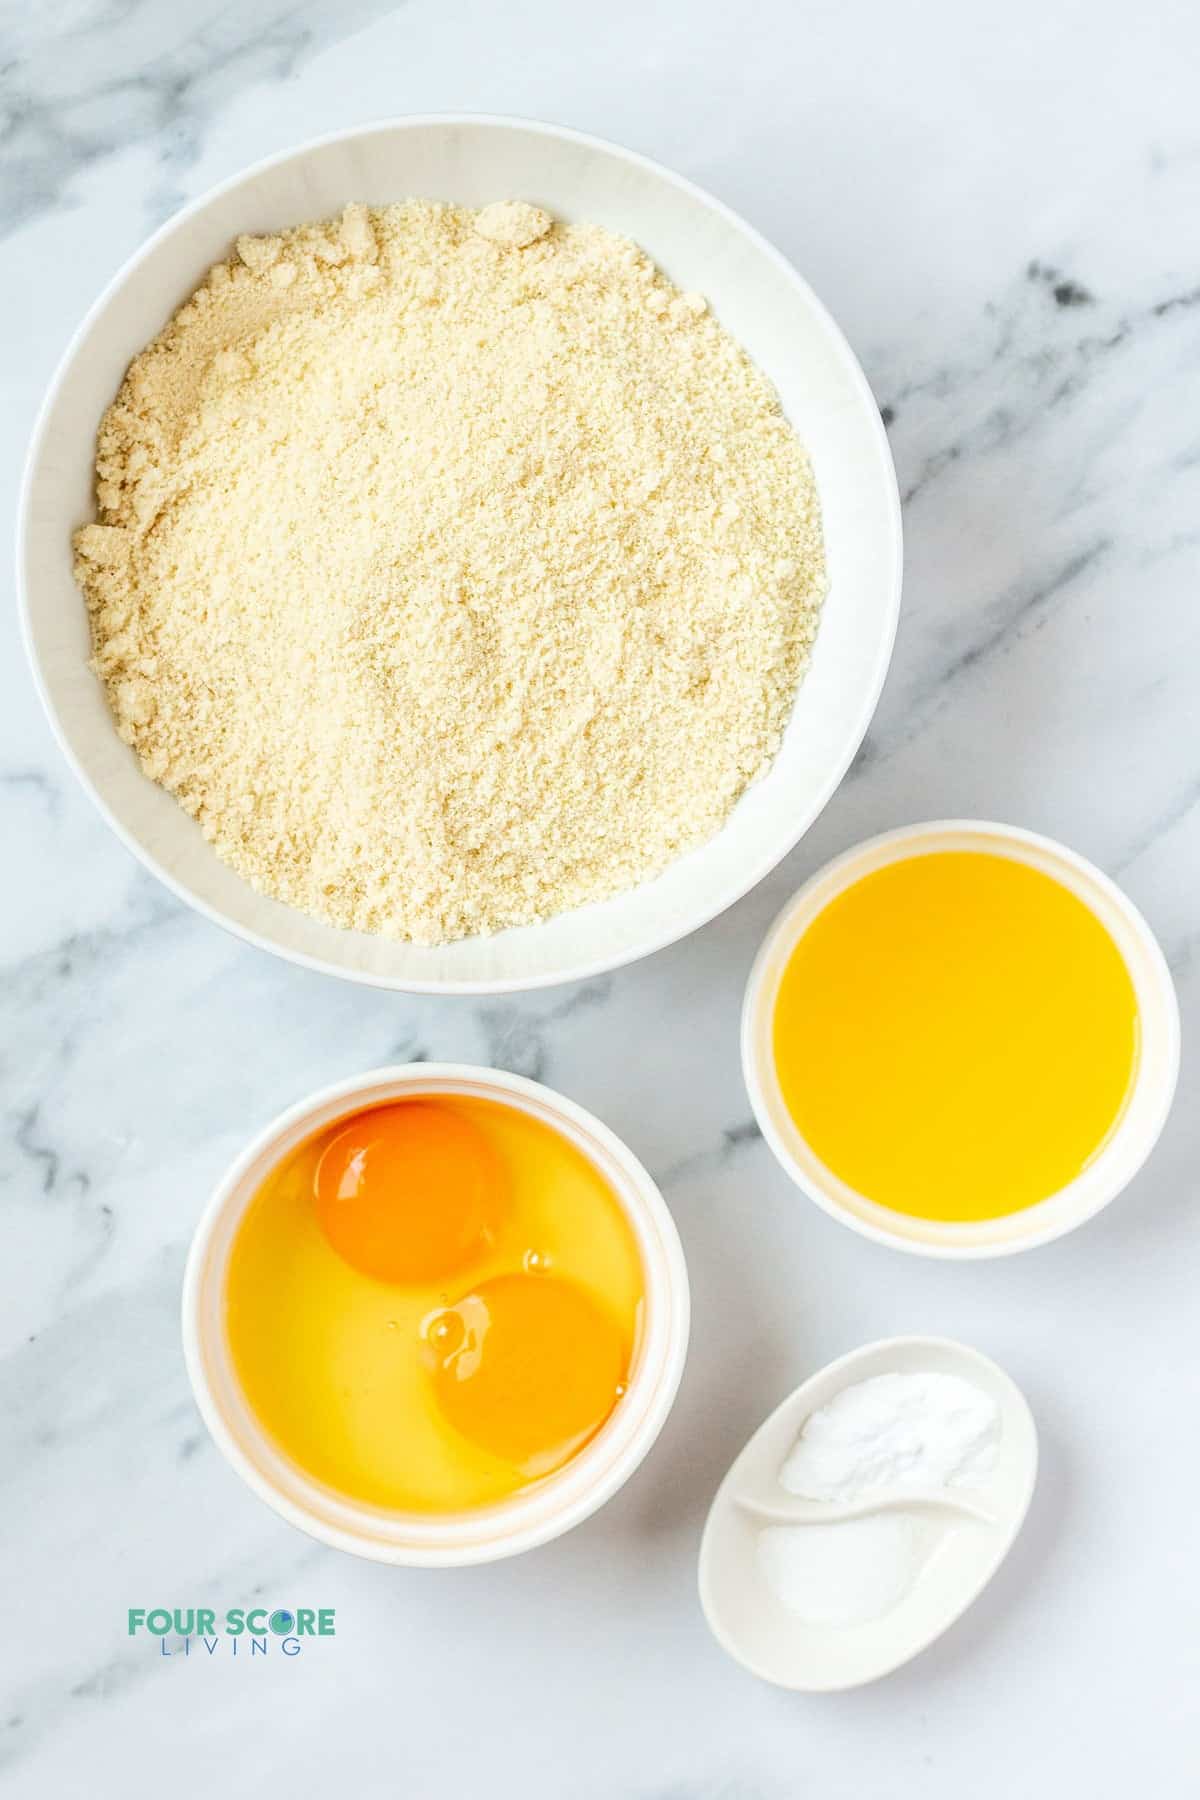 The ingredients needed for almond flour biscuits, including butter and eggs